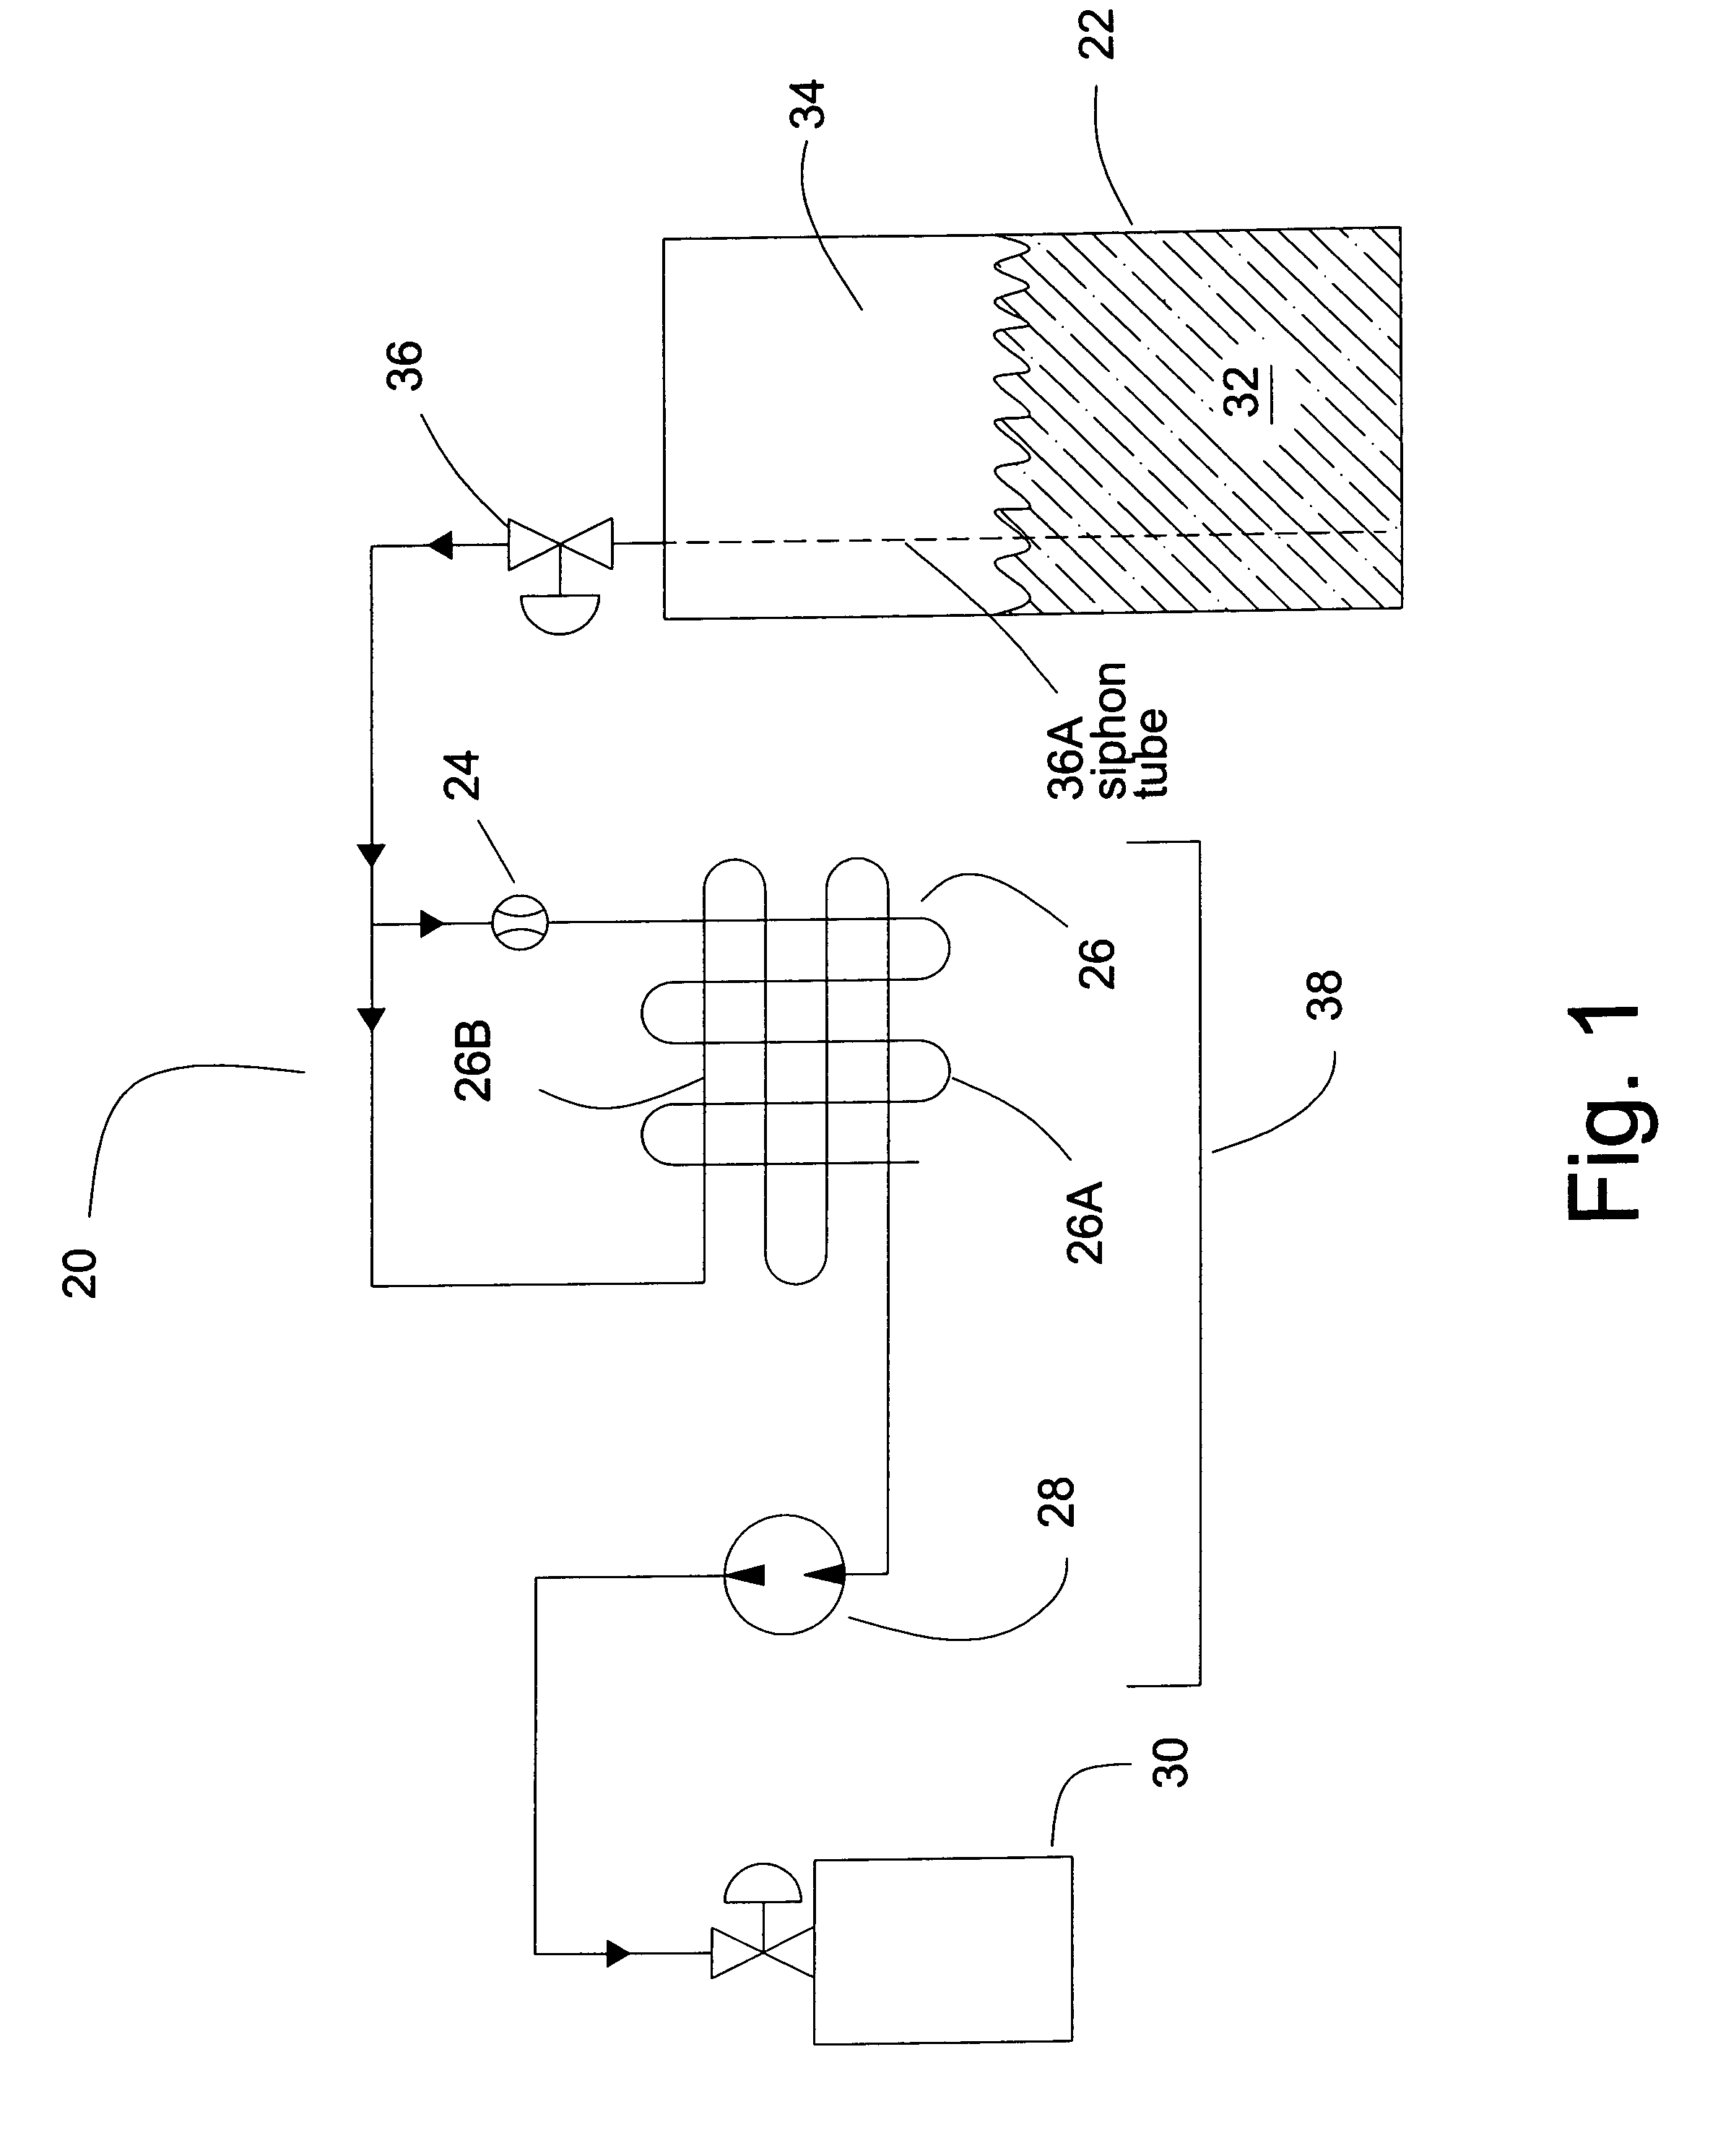 System and method of pumping liquified gas